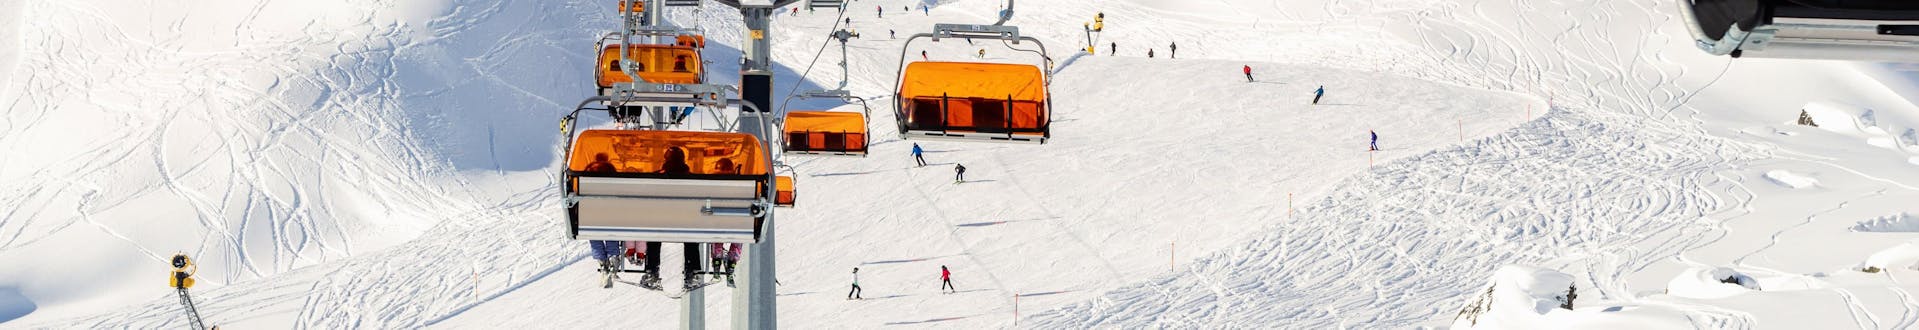 A ski lift and the snowy slopes of Silvretta Arena Ischgl, where a local ski school offers their ski lessons.